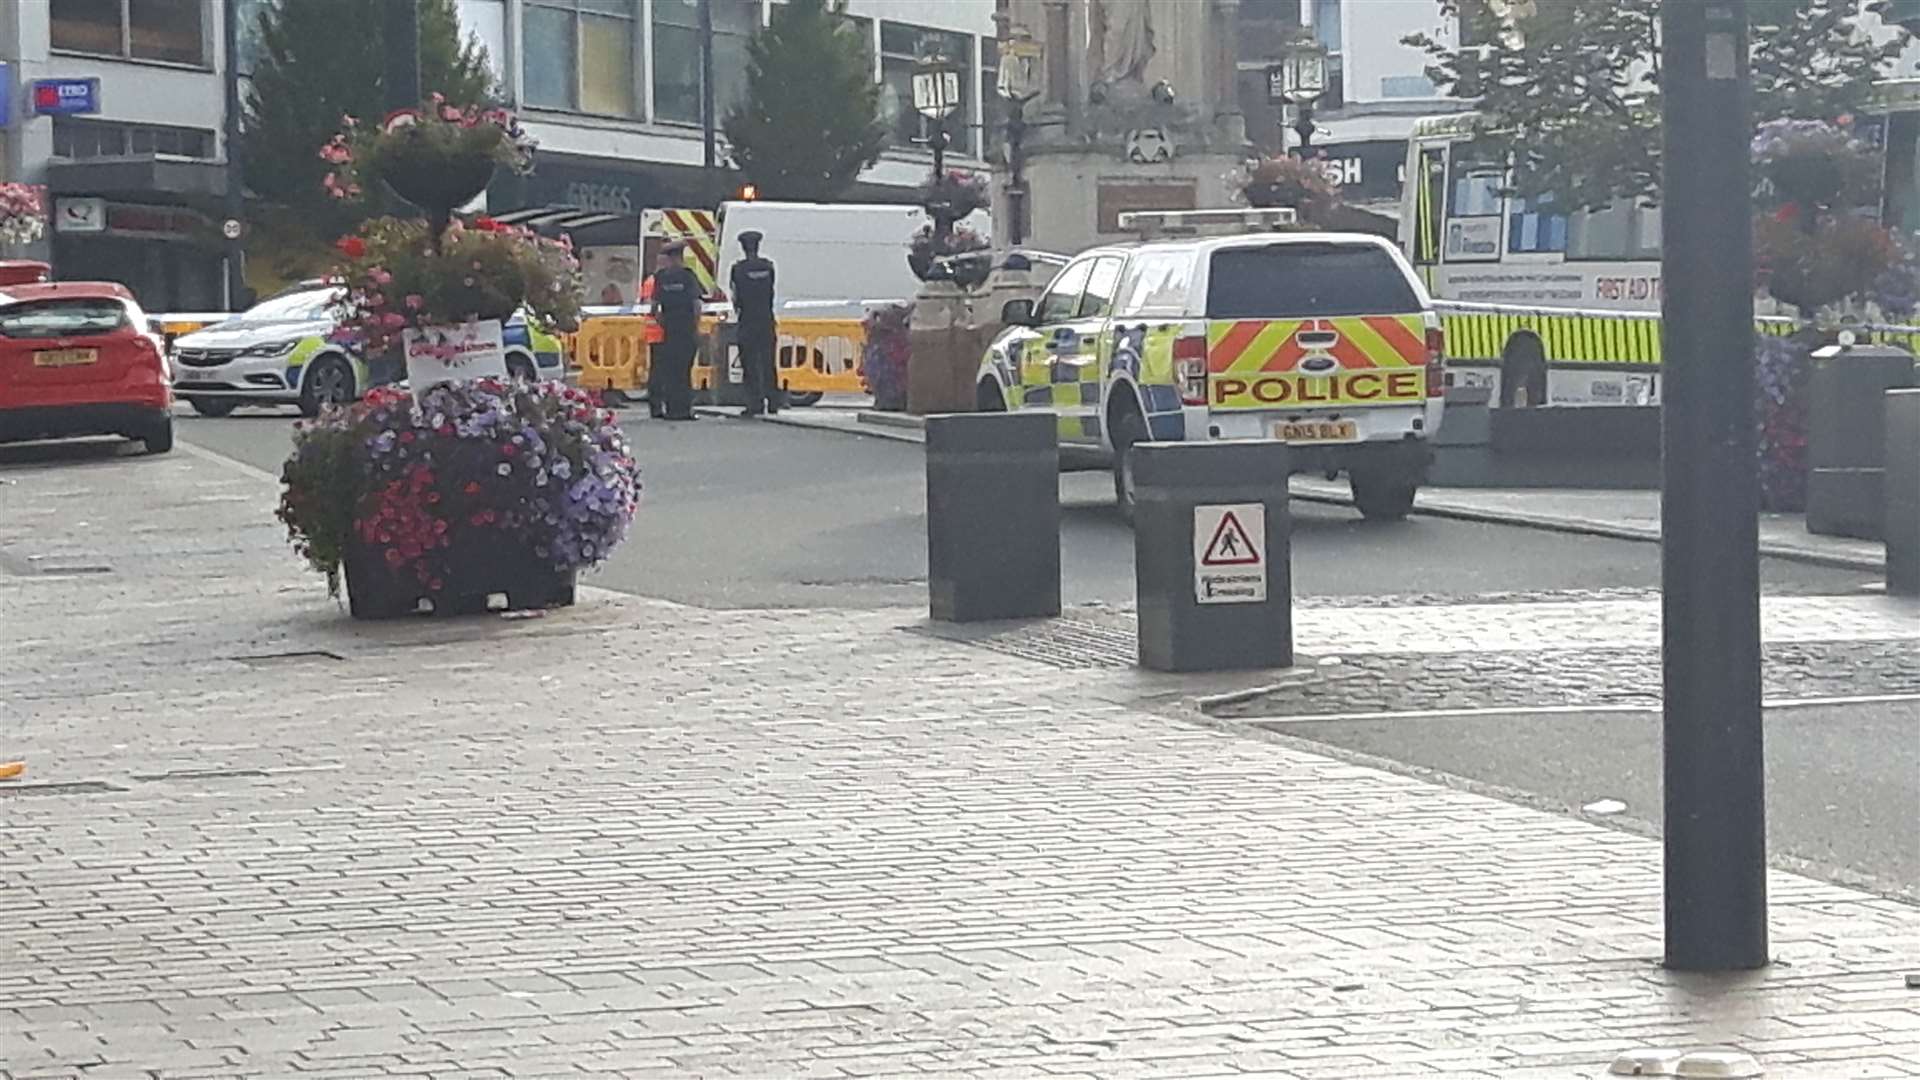 Jubilee Square is sealed off